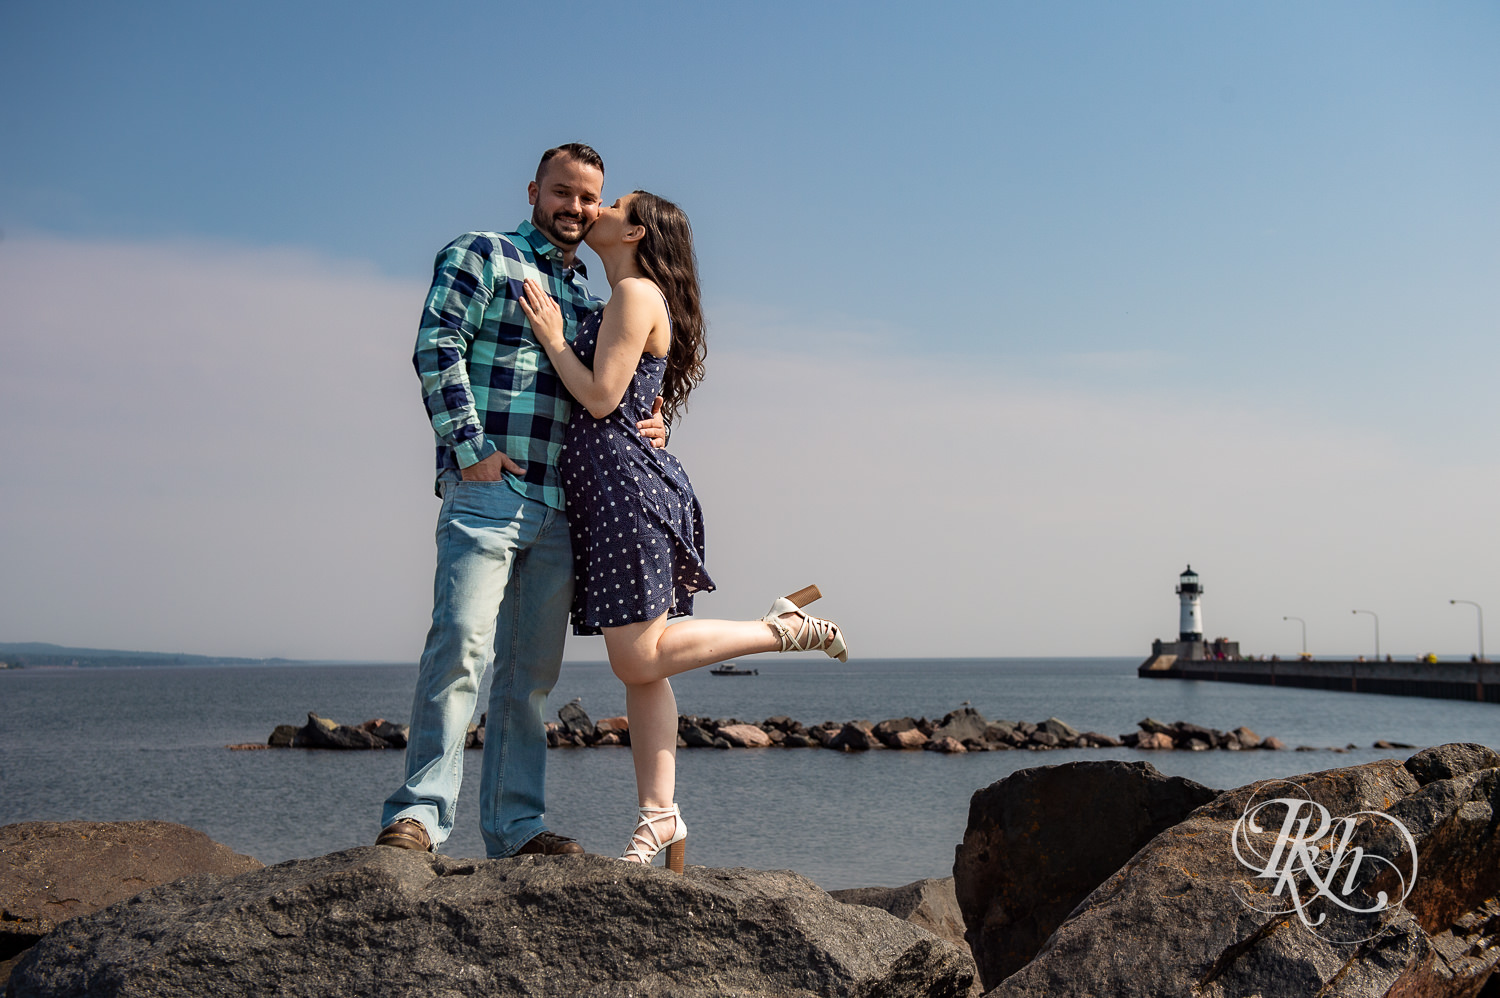 Man and woman kiss in front of Lake Superior in Canal Park in Duluth, Minnesota with bird flying over them.